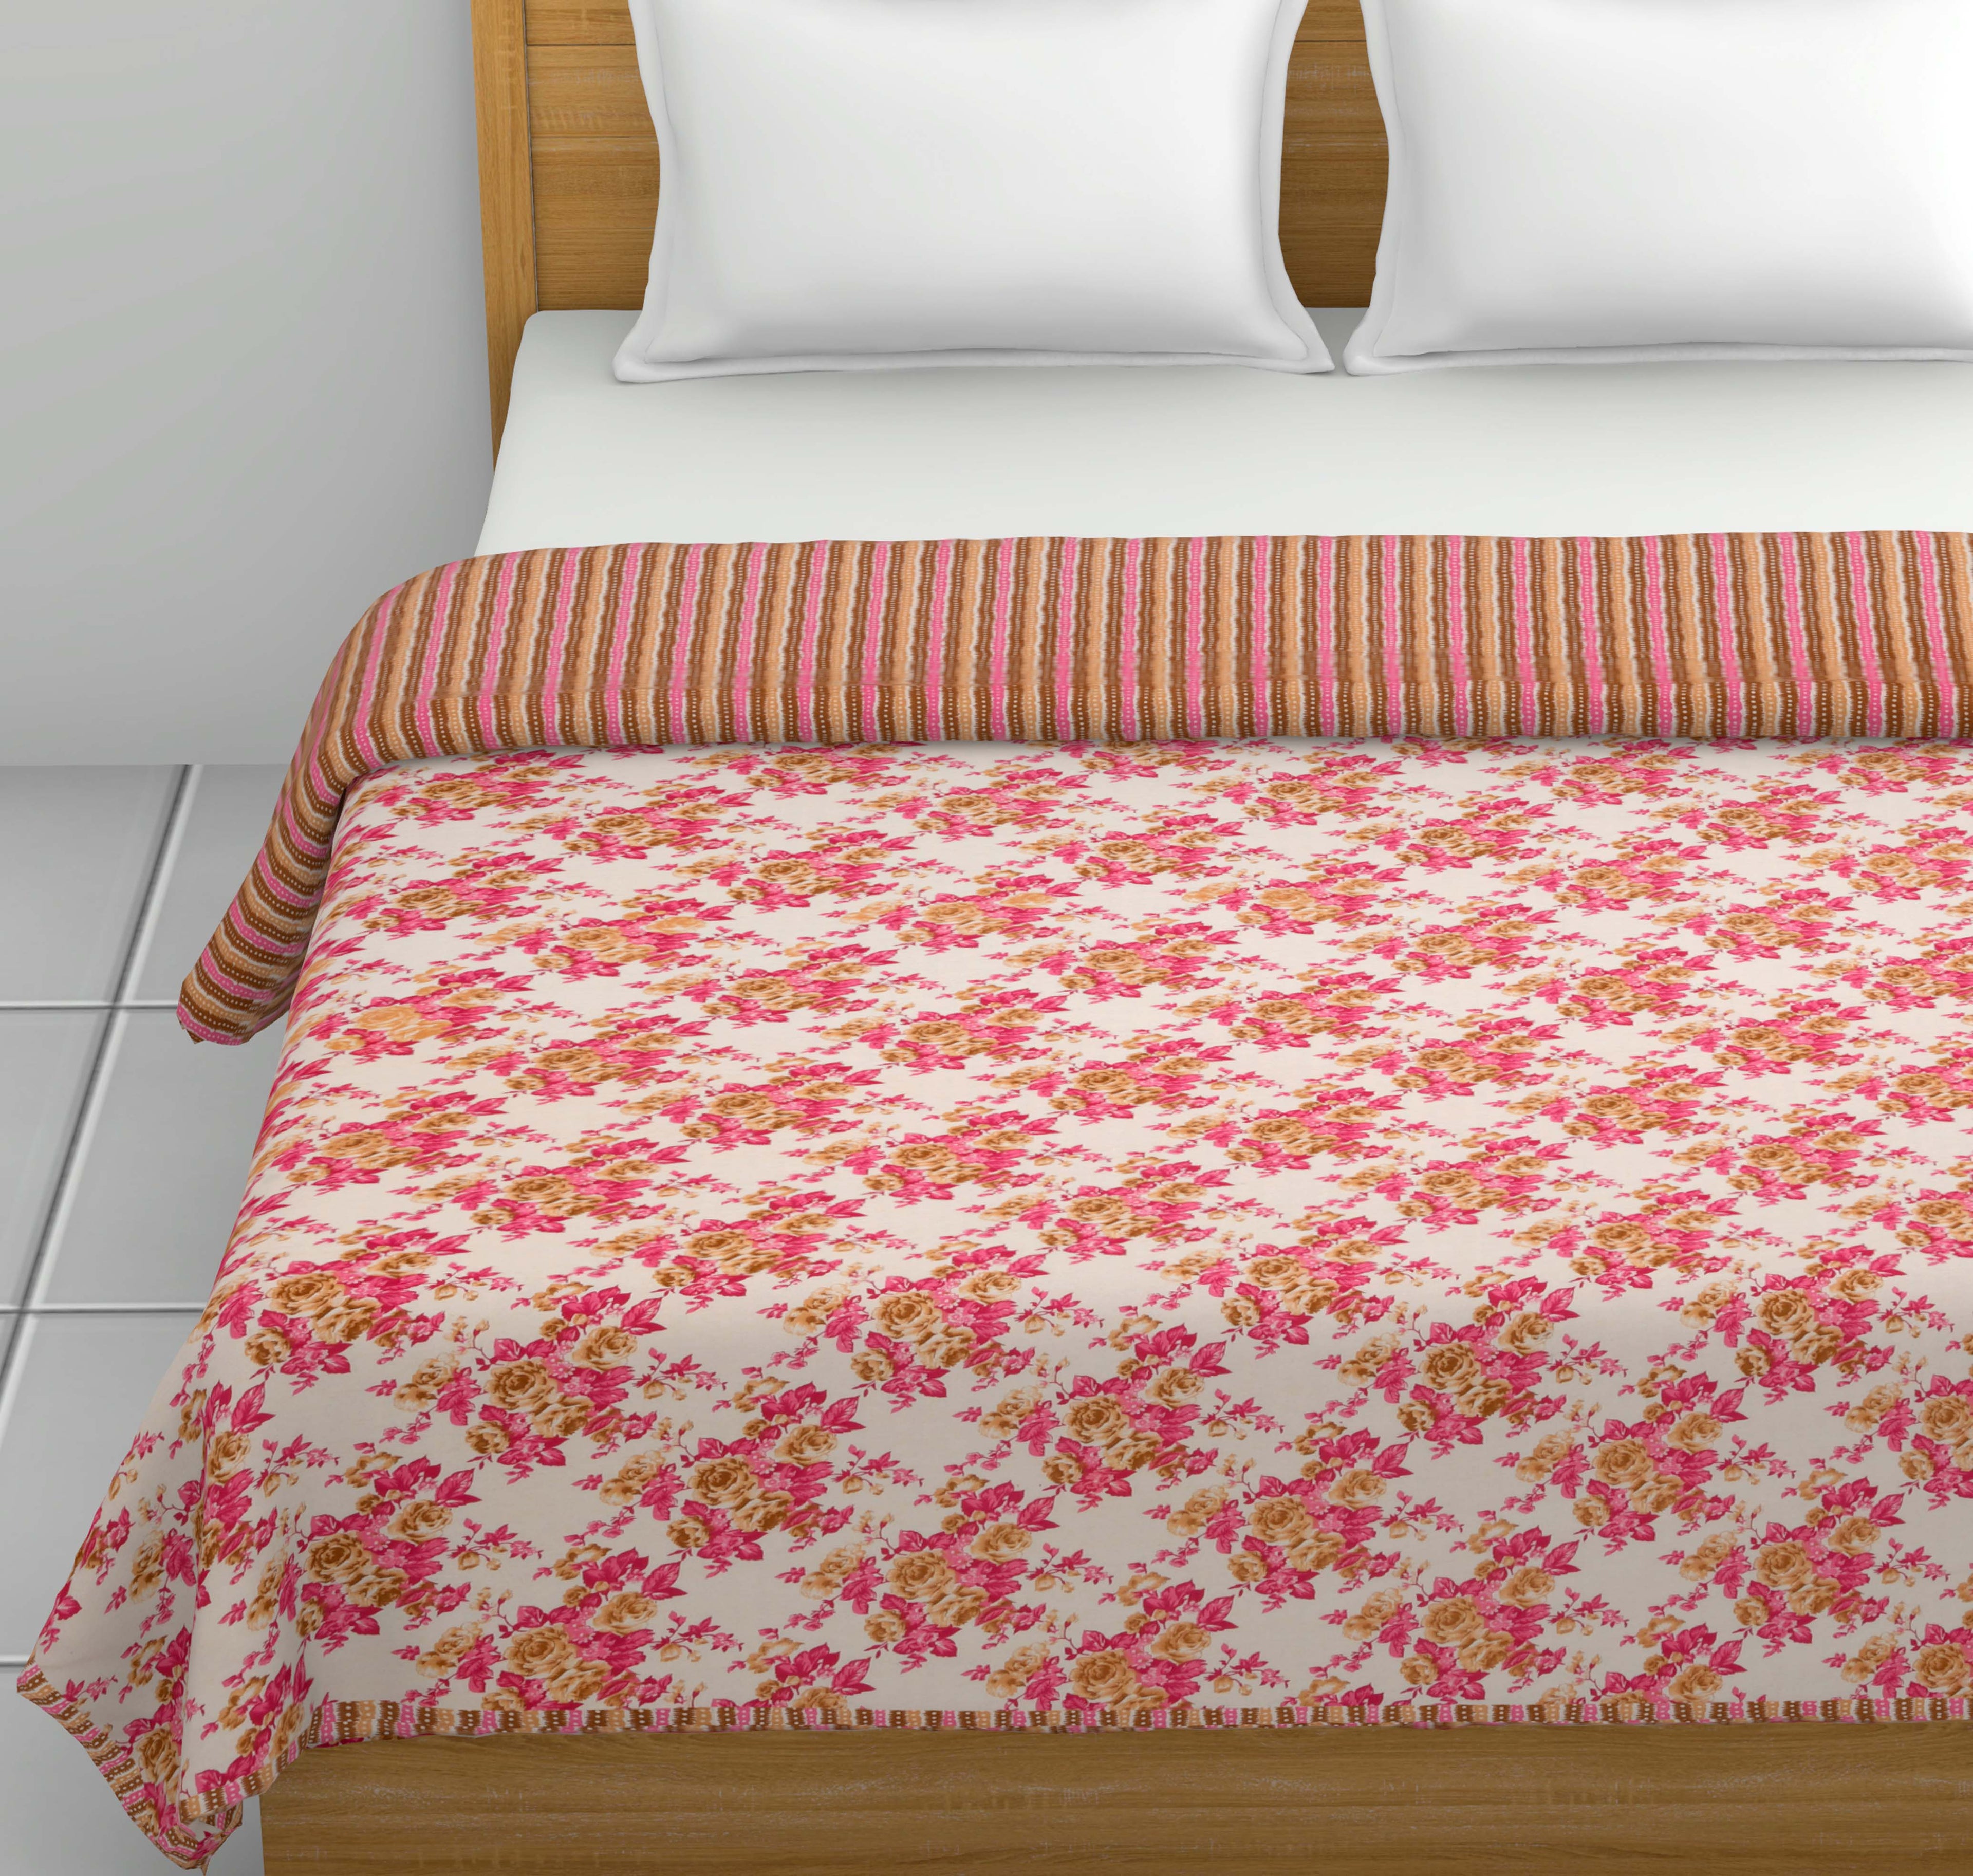 Dohar Cotton-Double Bed- Rose Bouquet Pink N Brown